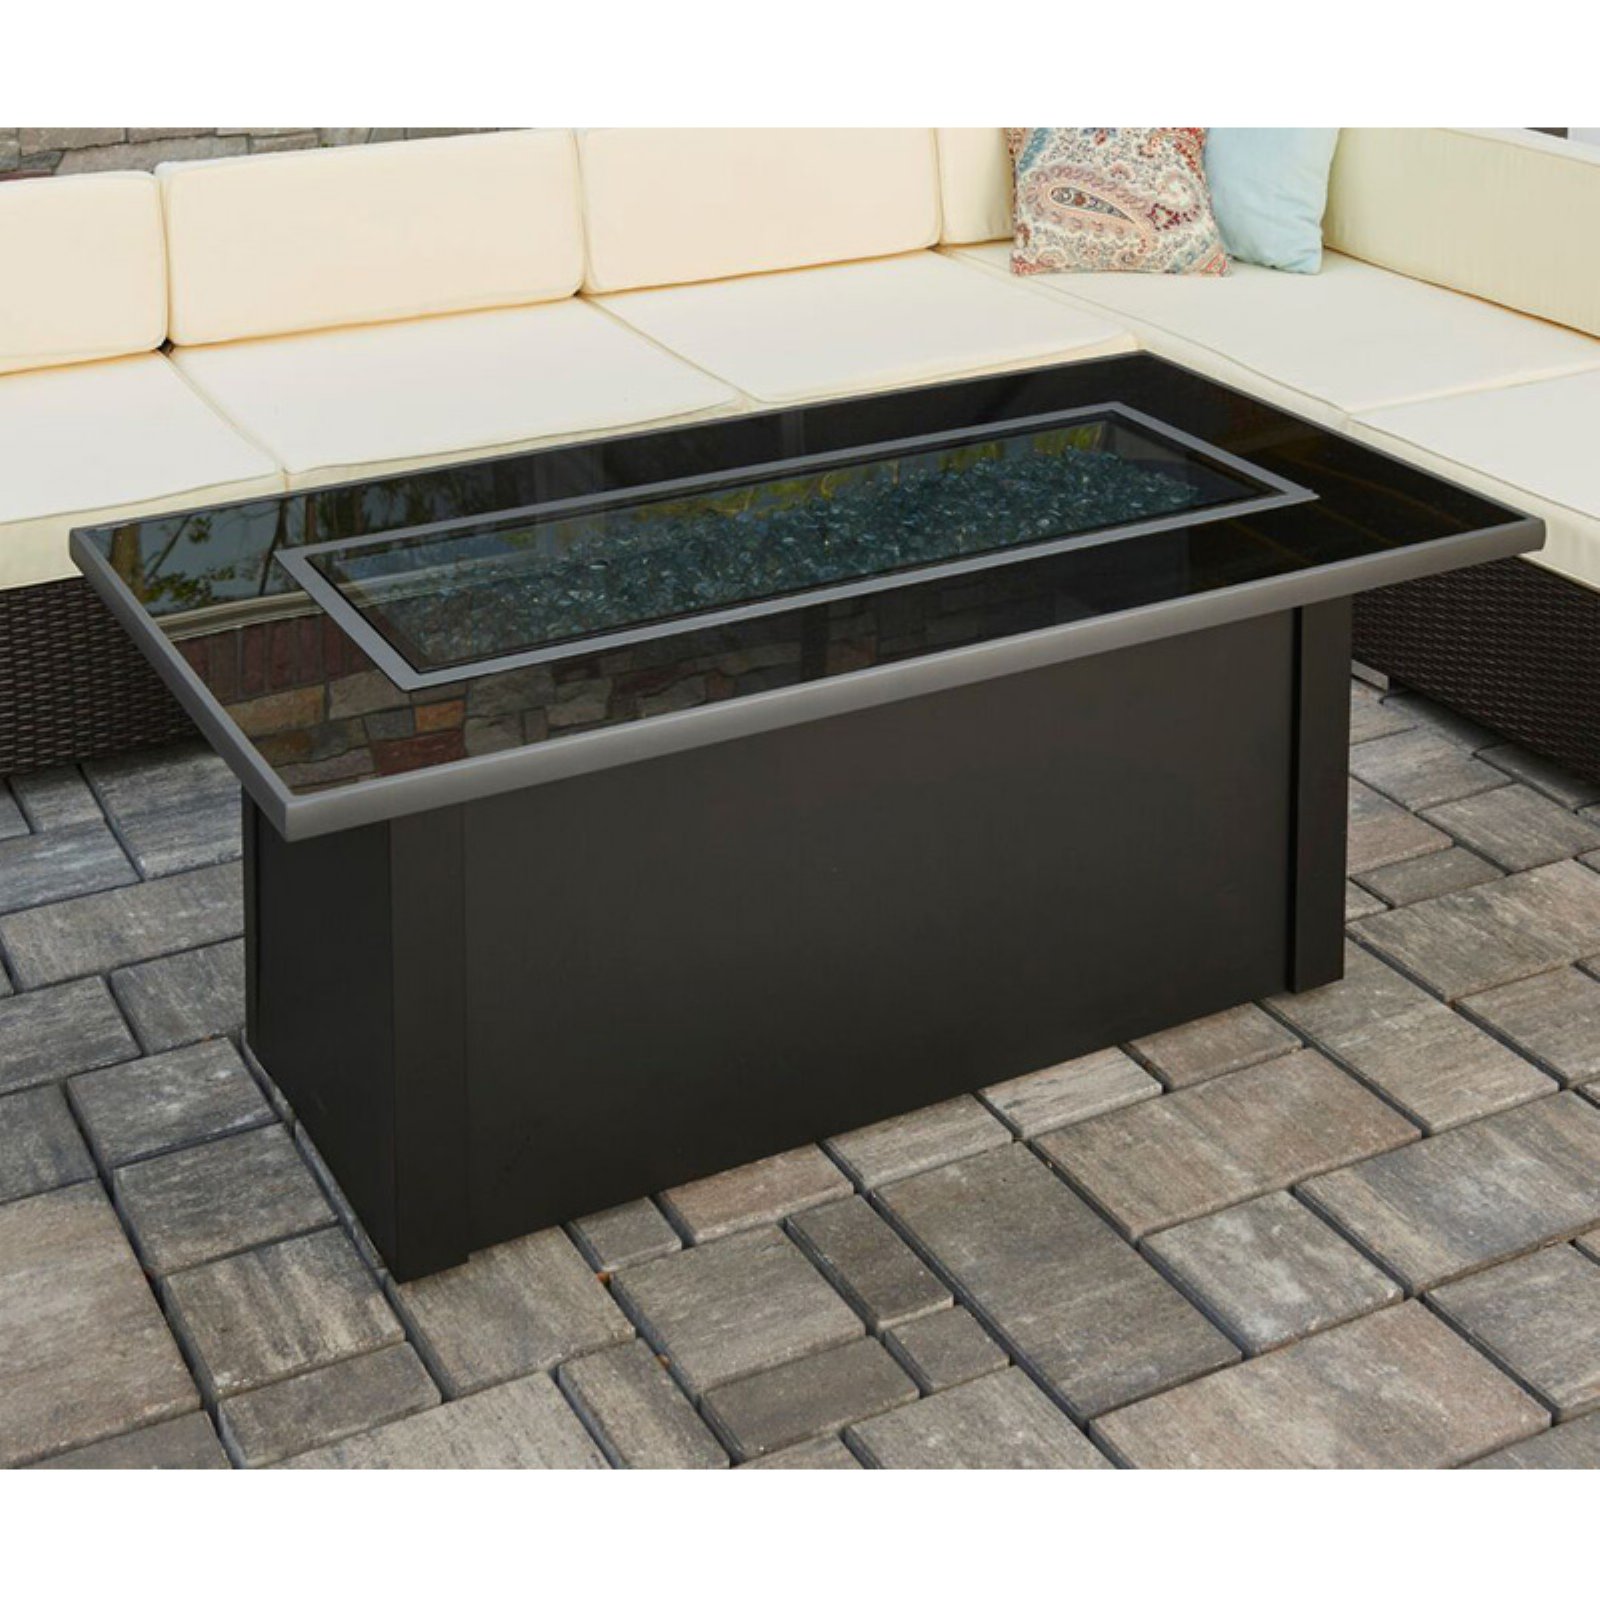 Fireplace Summer Cover Luxury Outdoor Greatroom Monte Carlo 59 3 In Fire Table with Free Cover